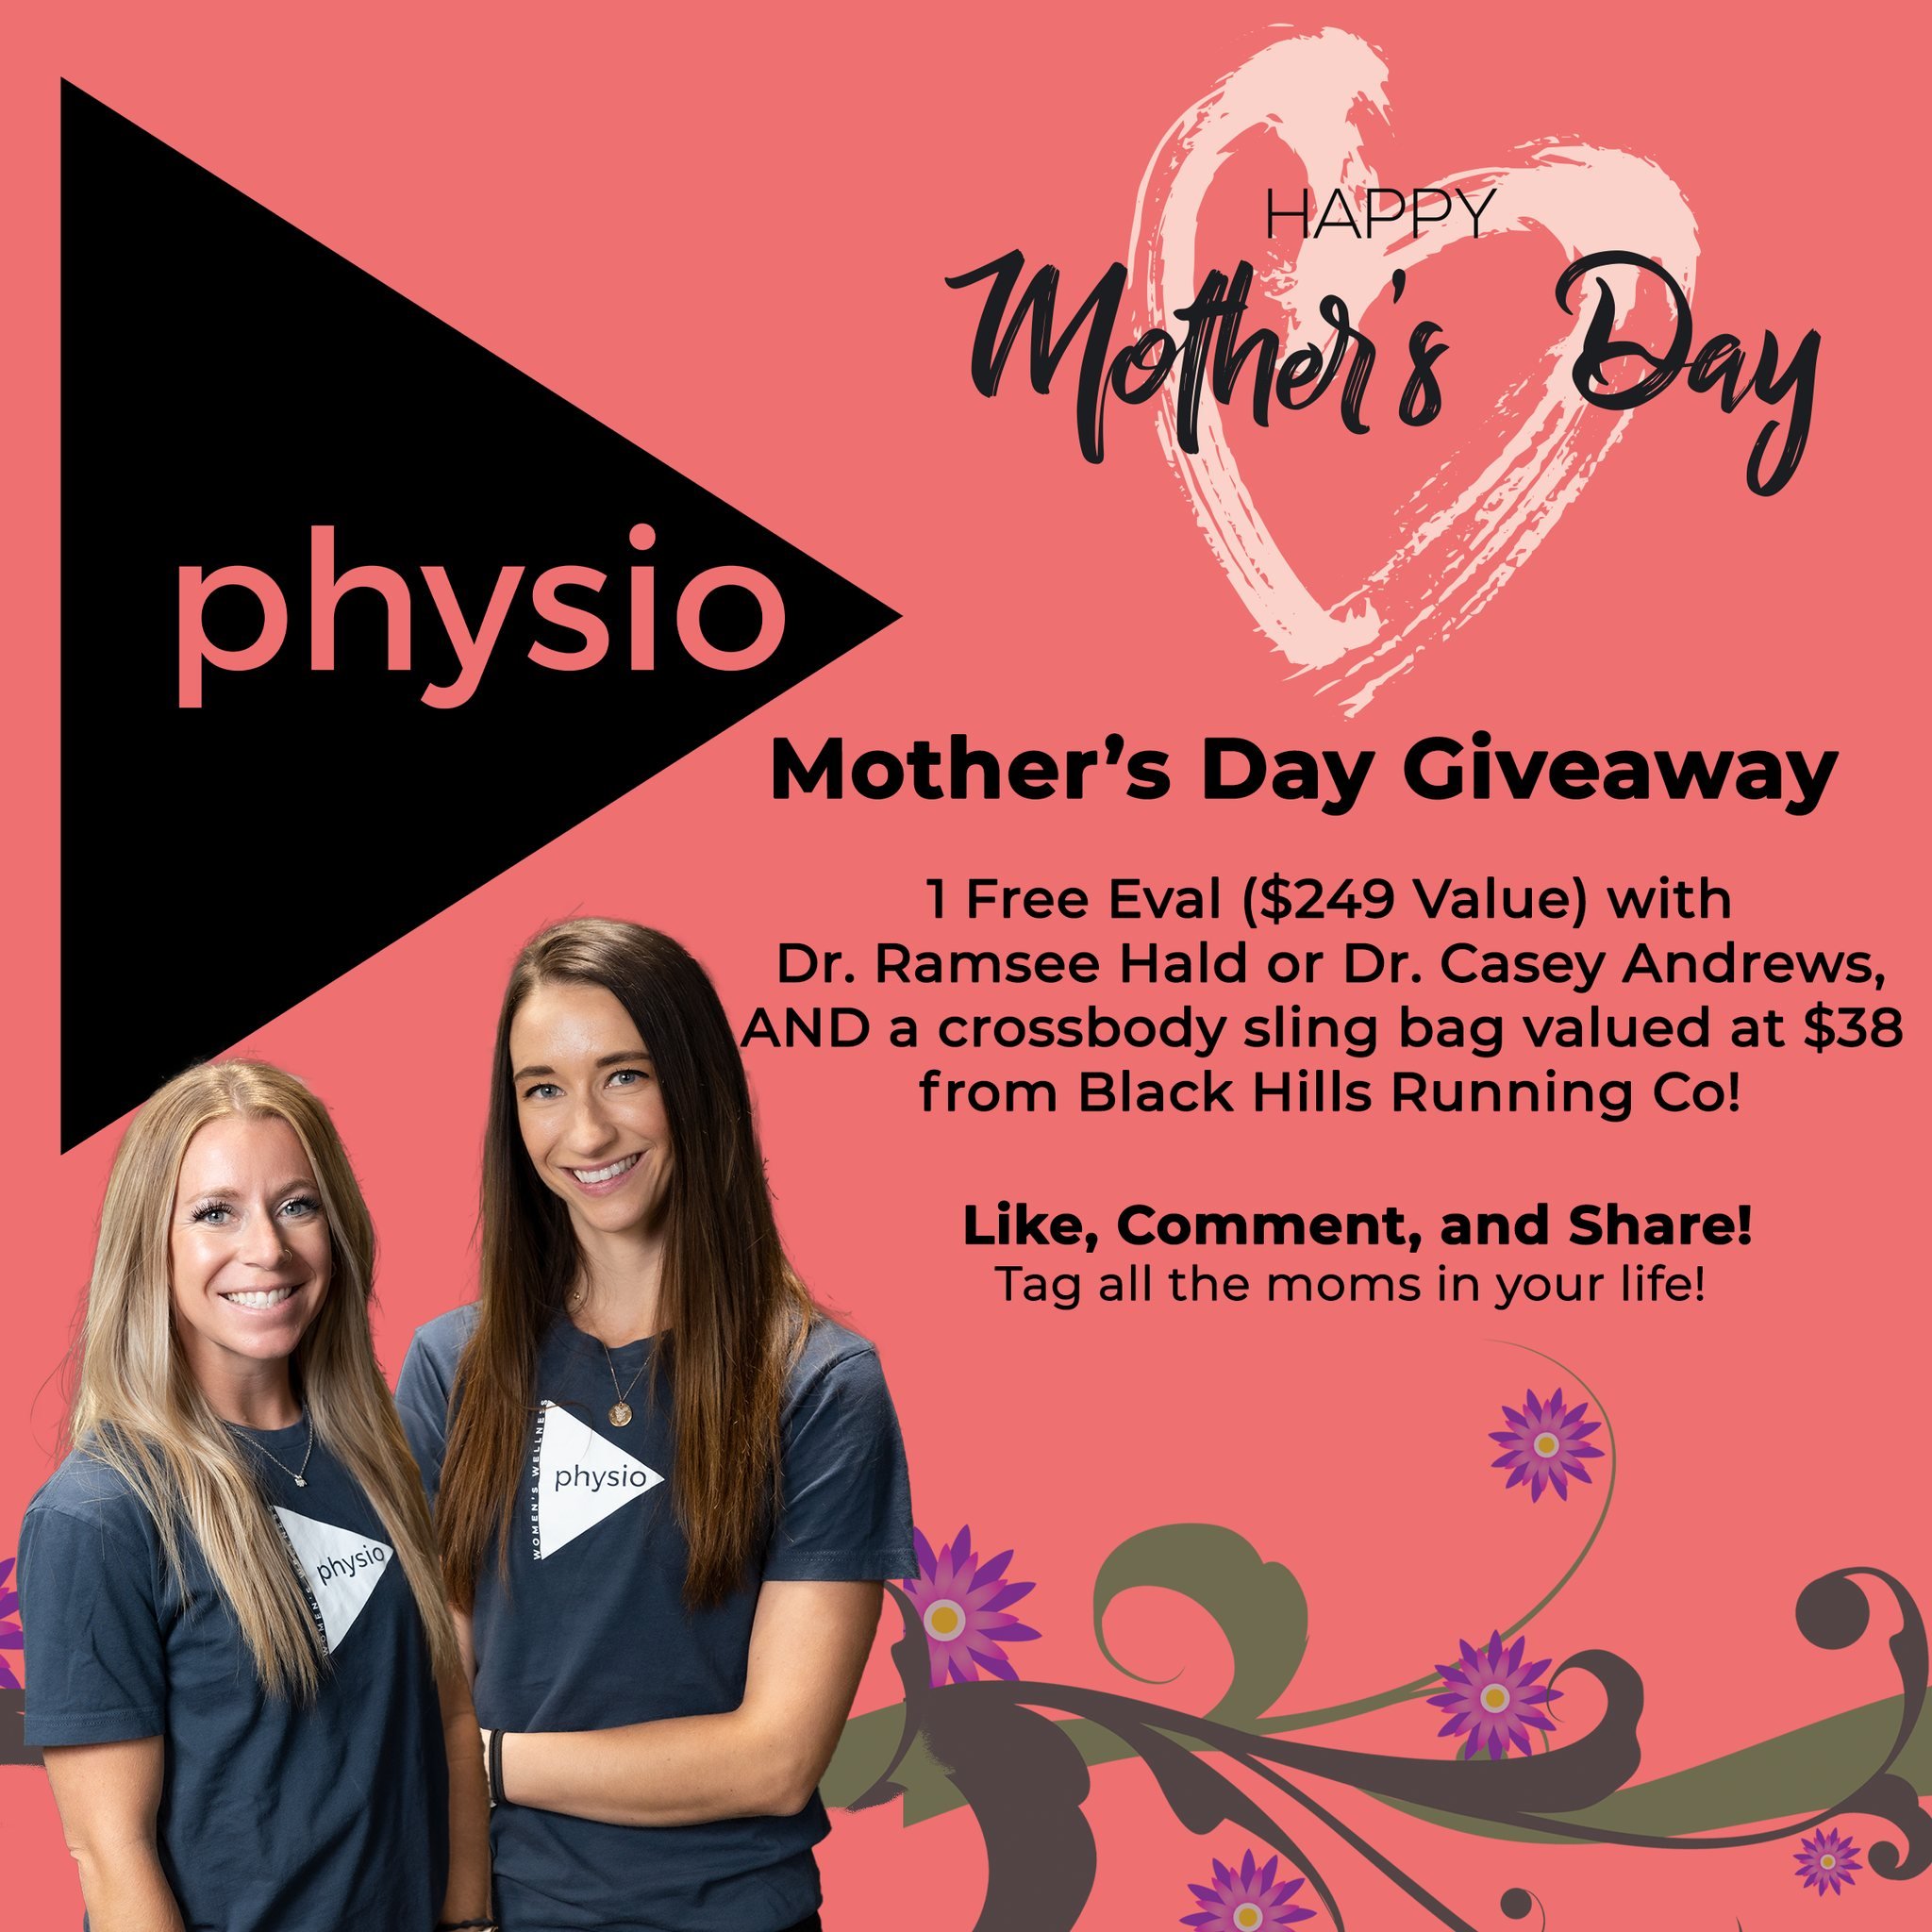 From our badass moms to yours, make this a Mother's Day to remember! Make sure you Like, Comment, and Share this post to be entered into our drawing! Tag all the mothers in your life; each person you tag will count as an extra entry for you in the dr